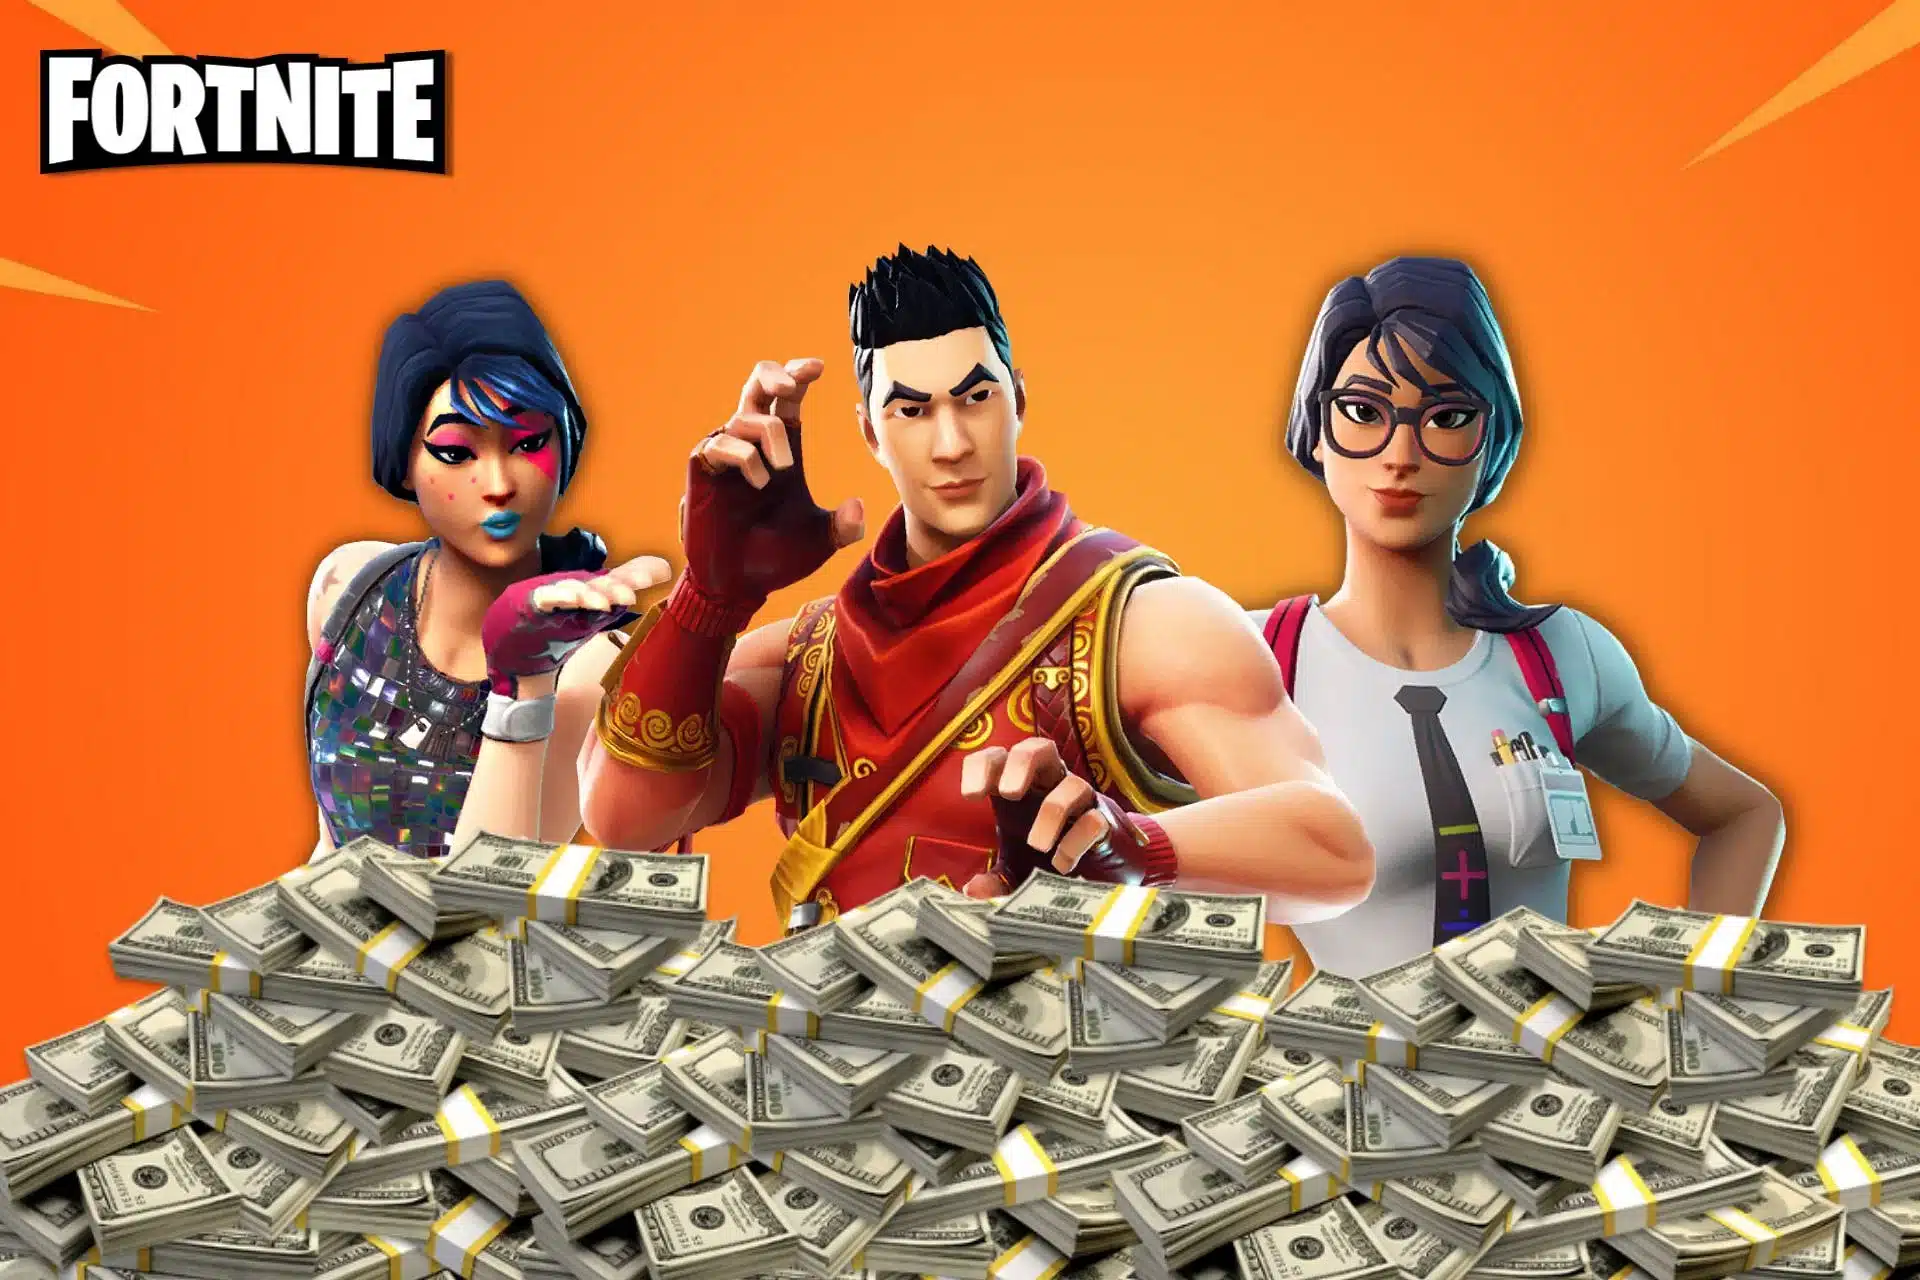 How much money does Fortnite make in a day?